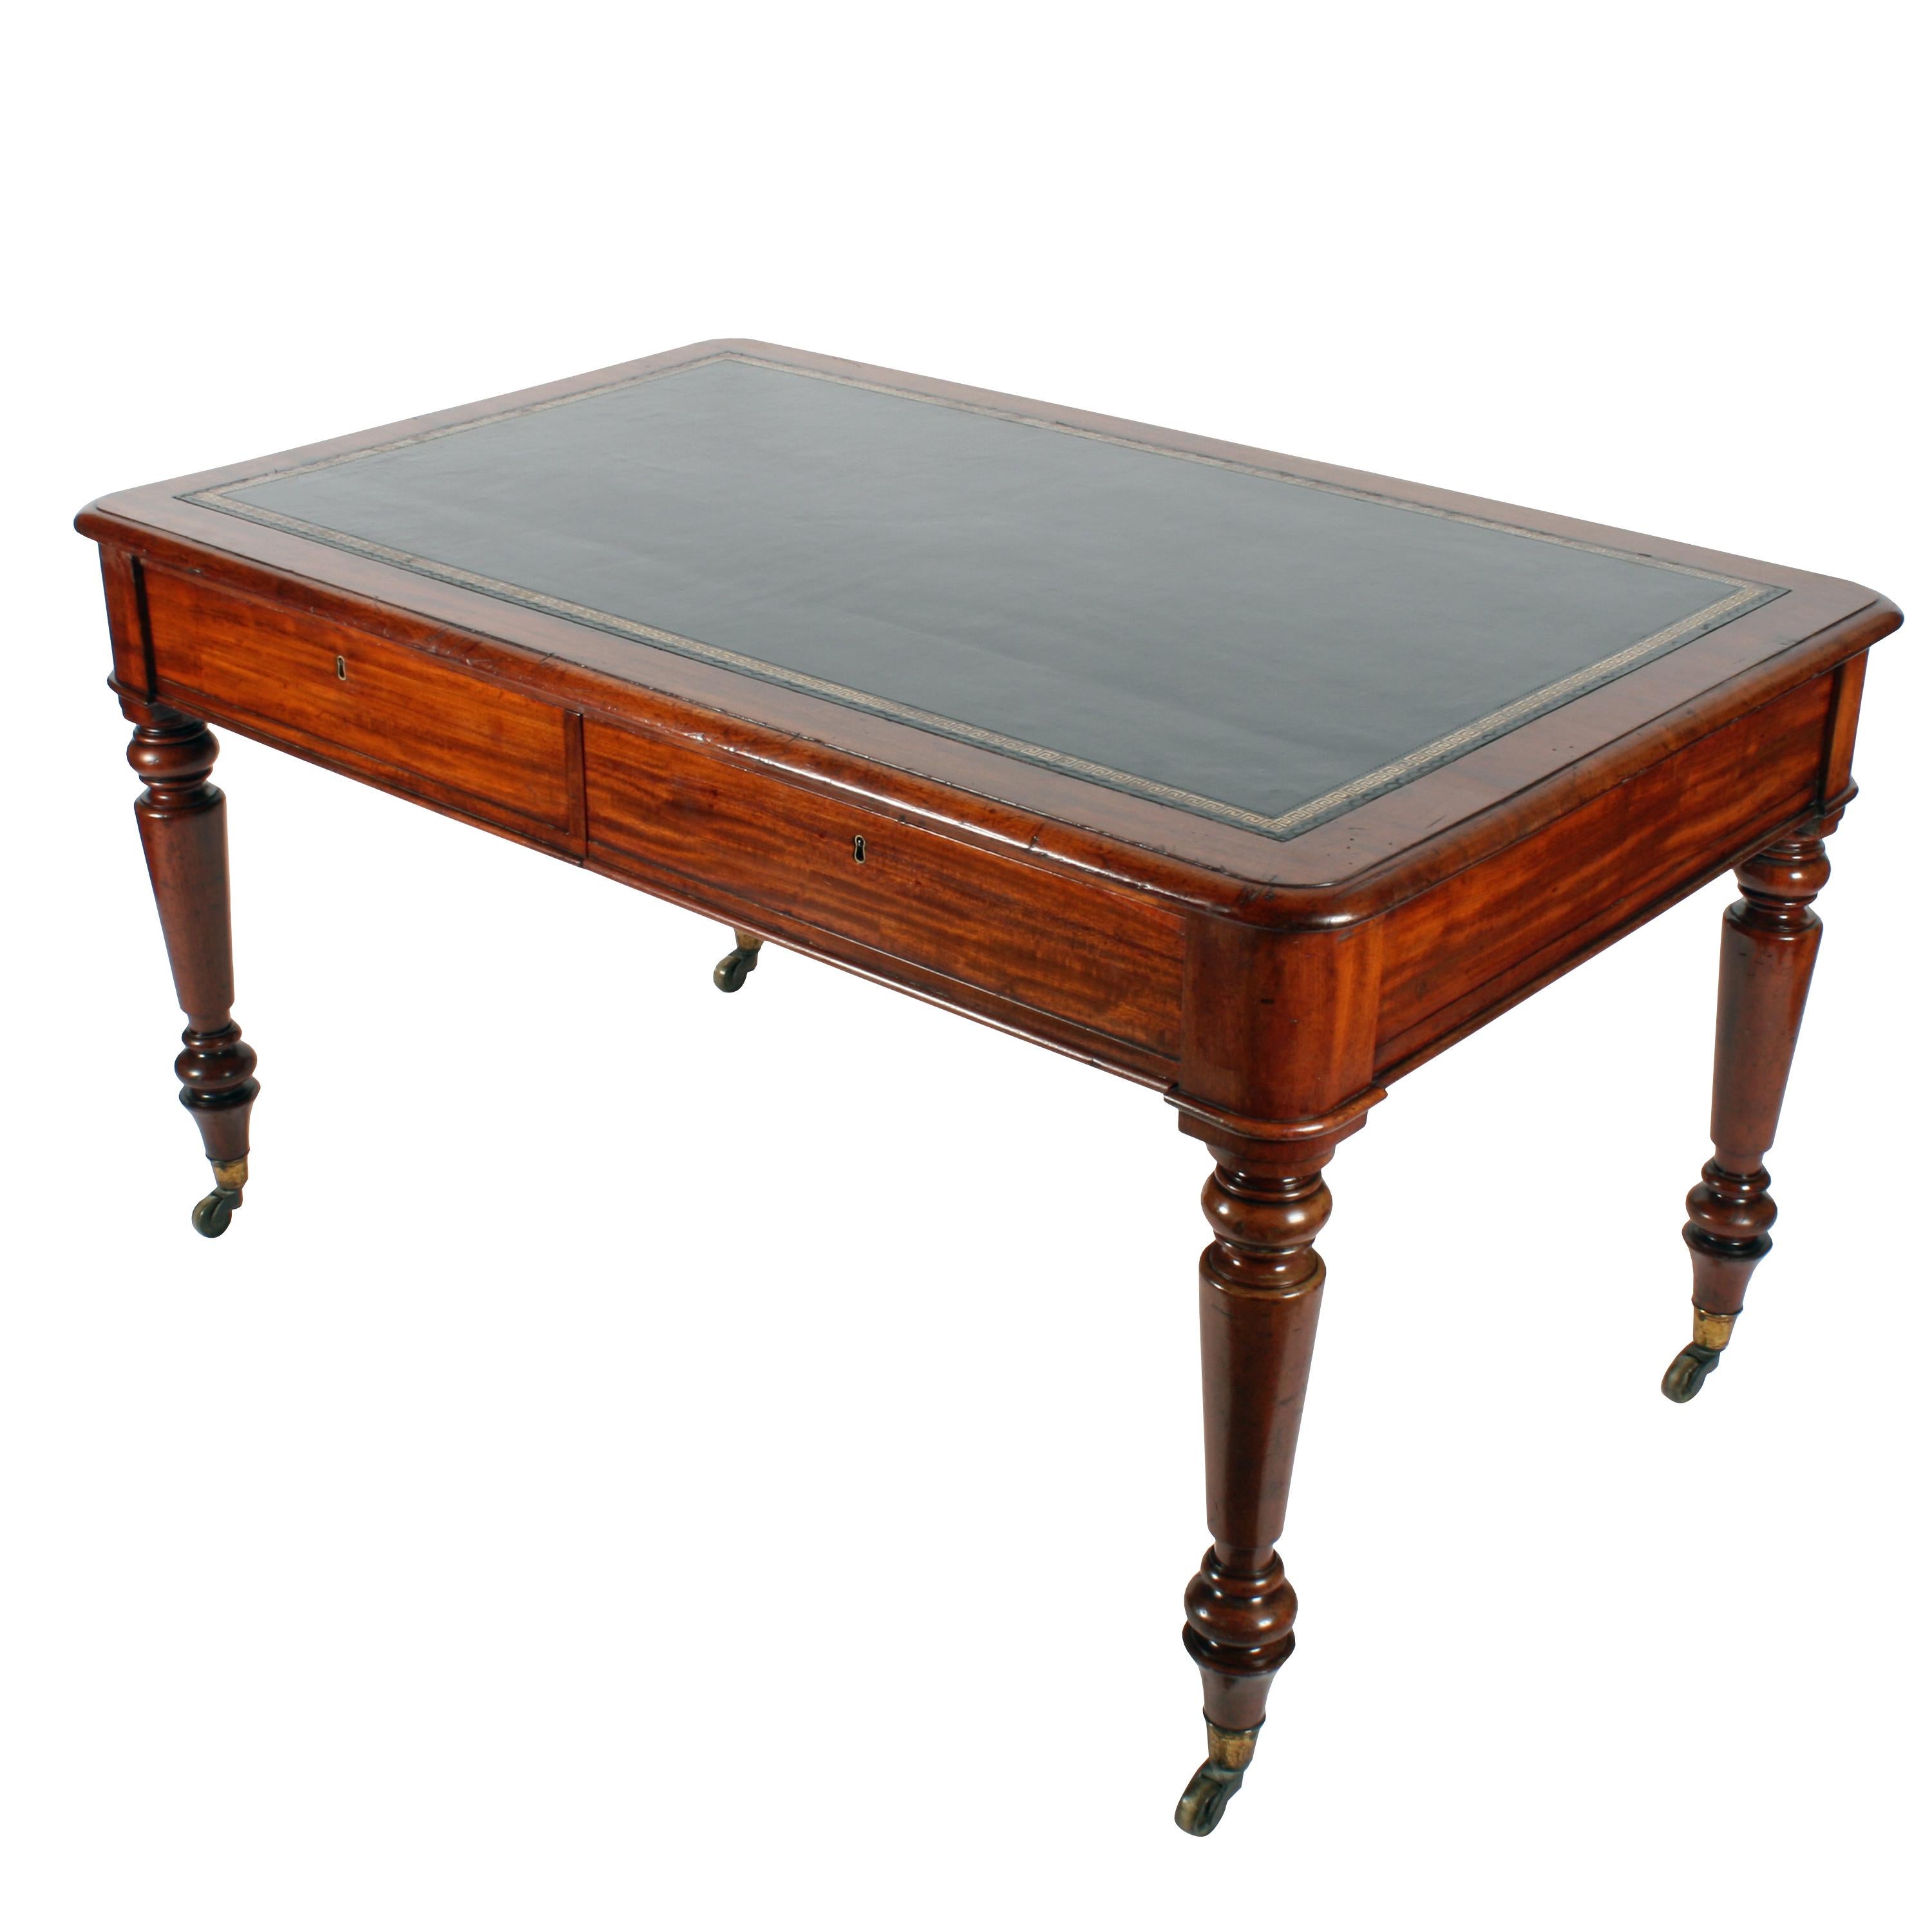 A mid-19th century William IV mahogany four-drawer writing table.

The table has a black hide writing surface and stands on four turned mahogany legs with Cope & Collinson patent gilt brass casters.

The four drawers are mahogany lined and have